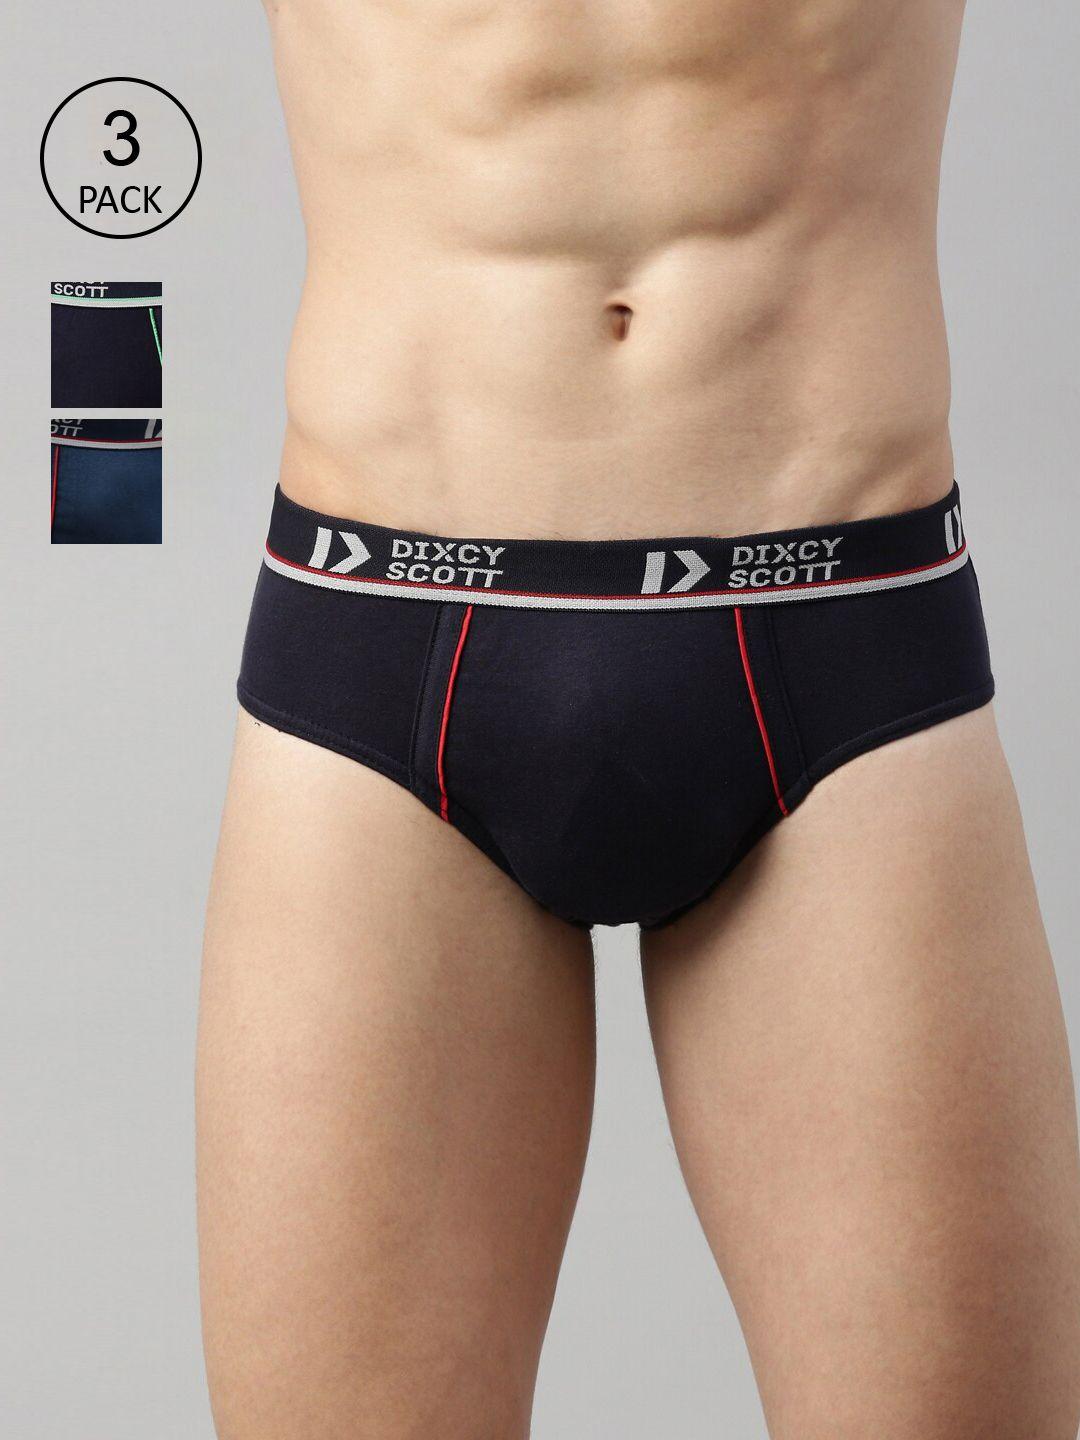 dixcy scott men pack of 3 blue solid cotton basic briefs dso-replay brief-p3